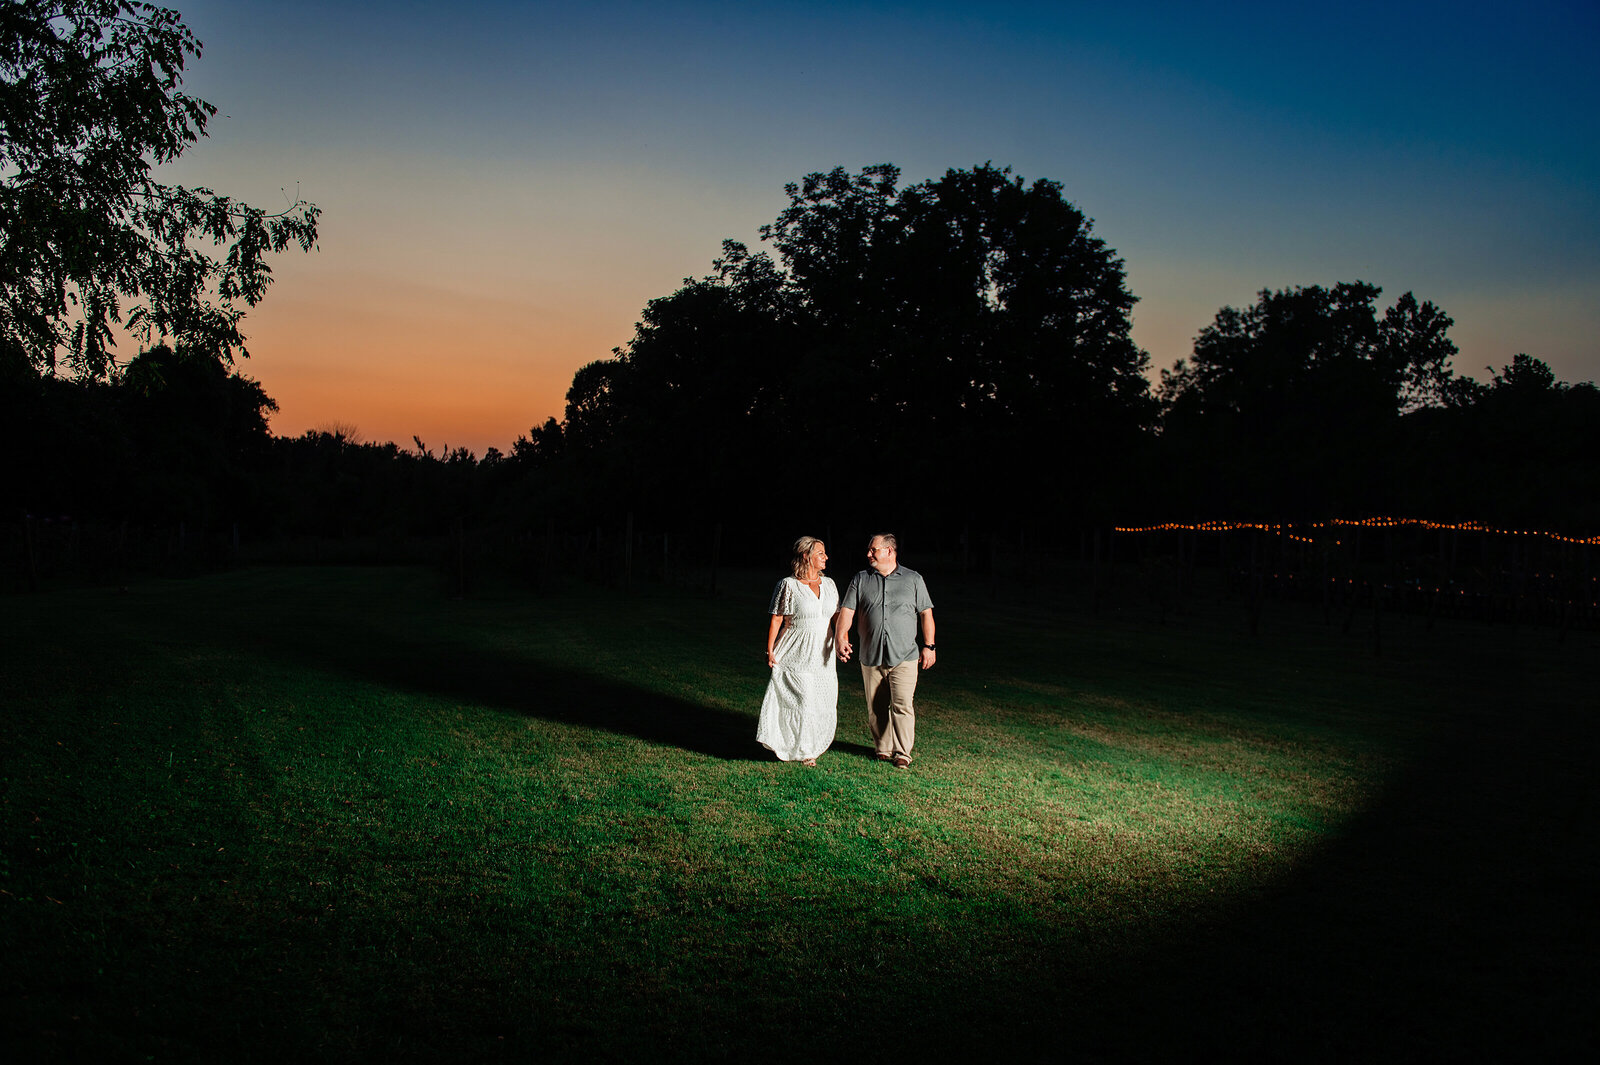 Couple walking through an open field at sunset, dramatic lighting in field